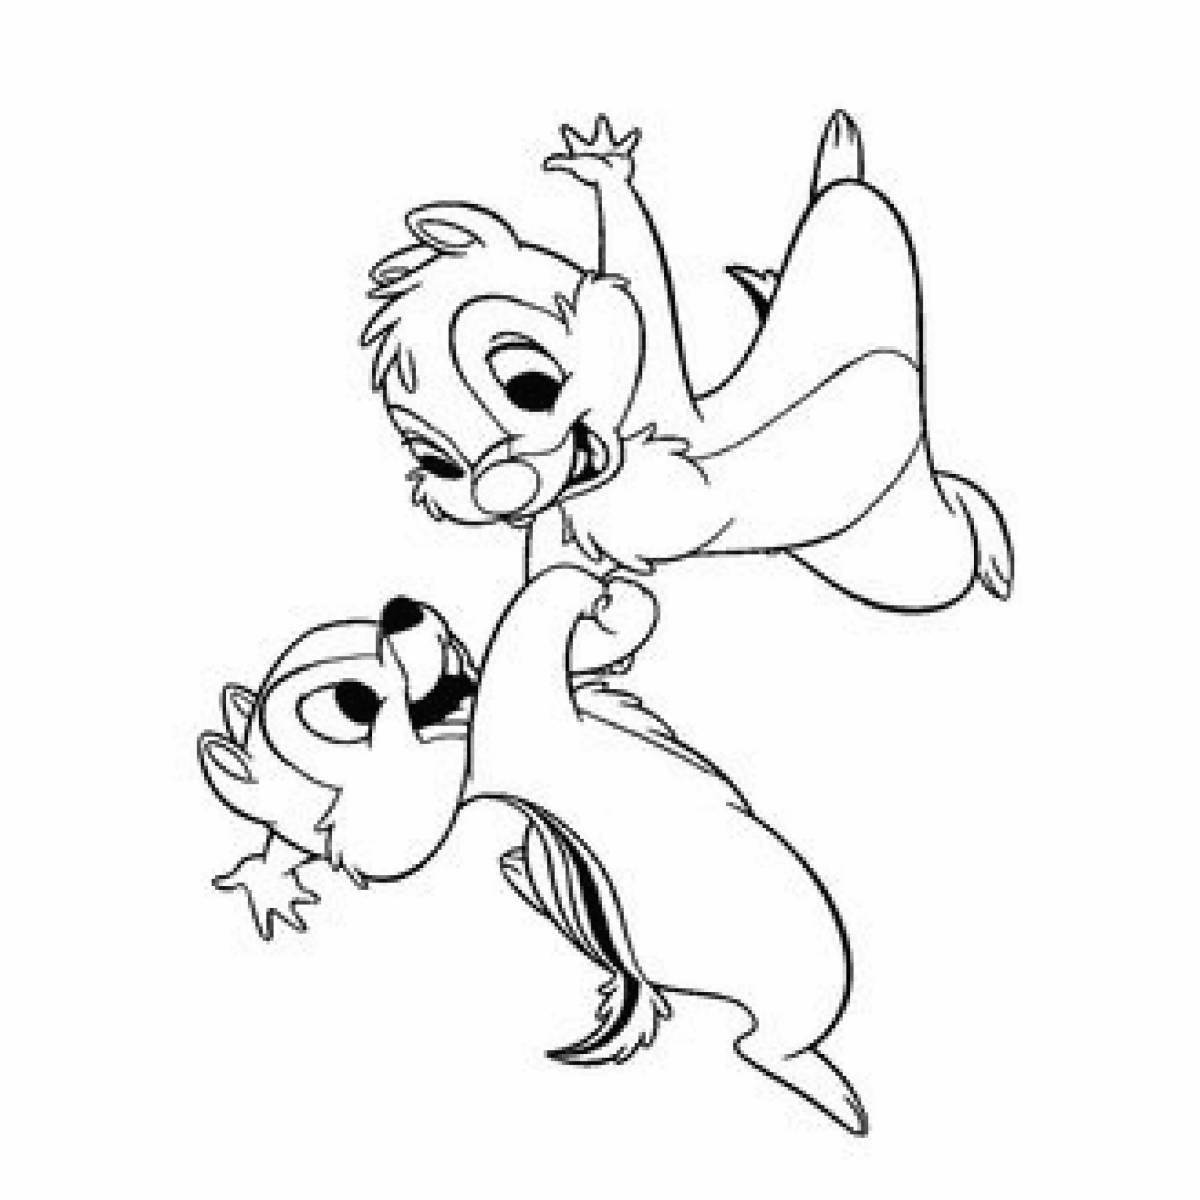 Fun Disney character coloring pages